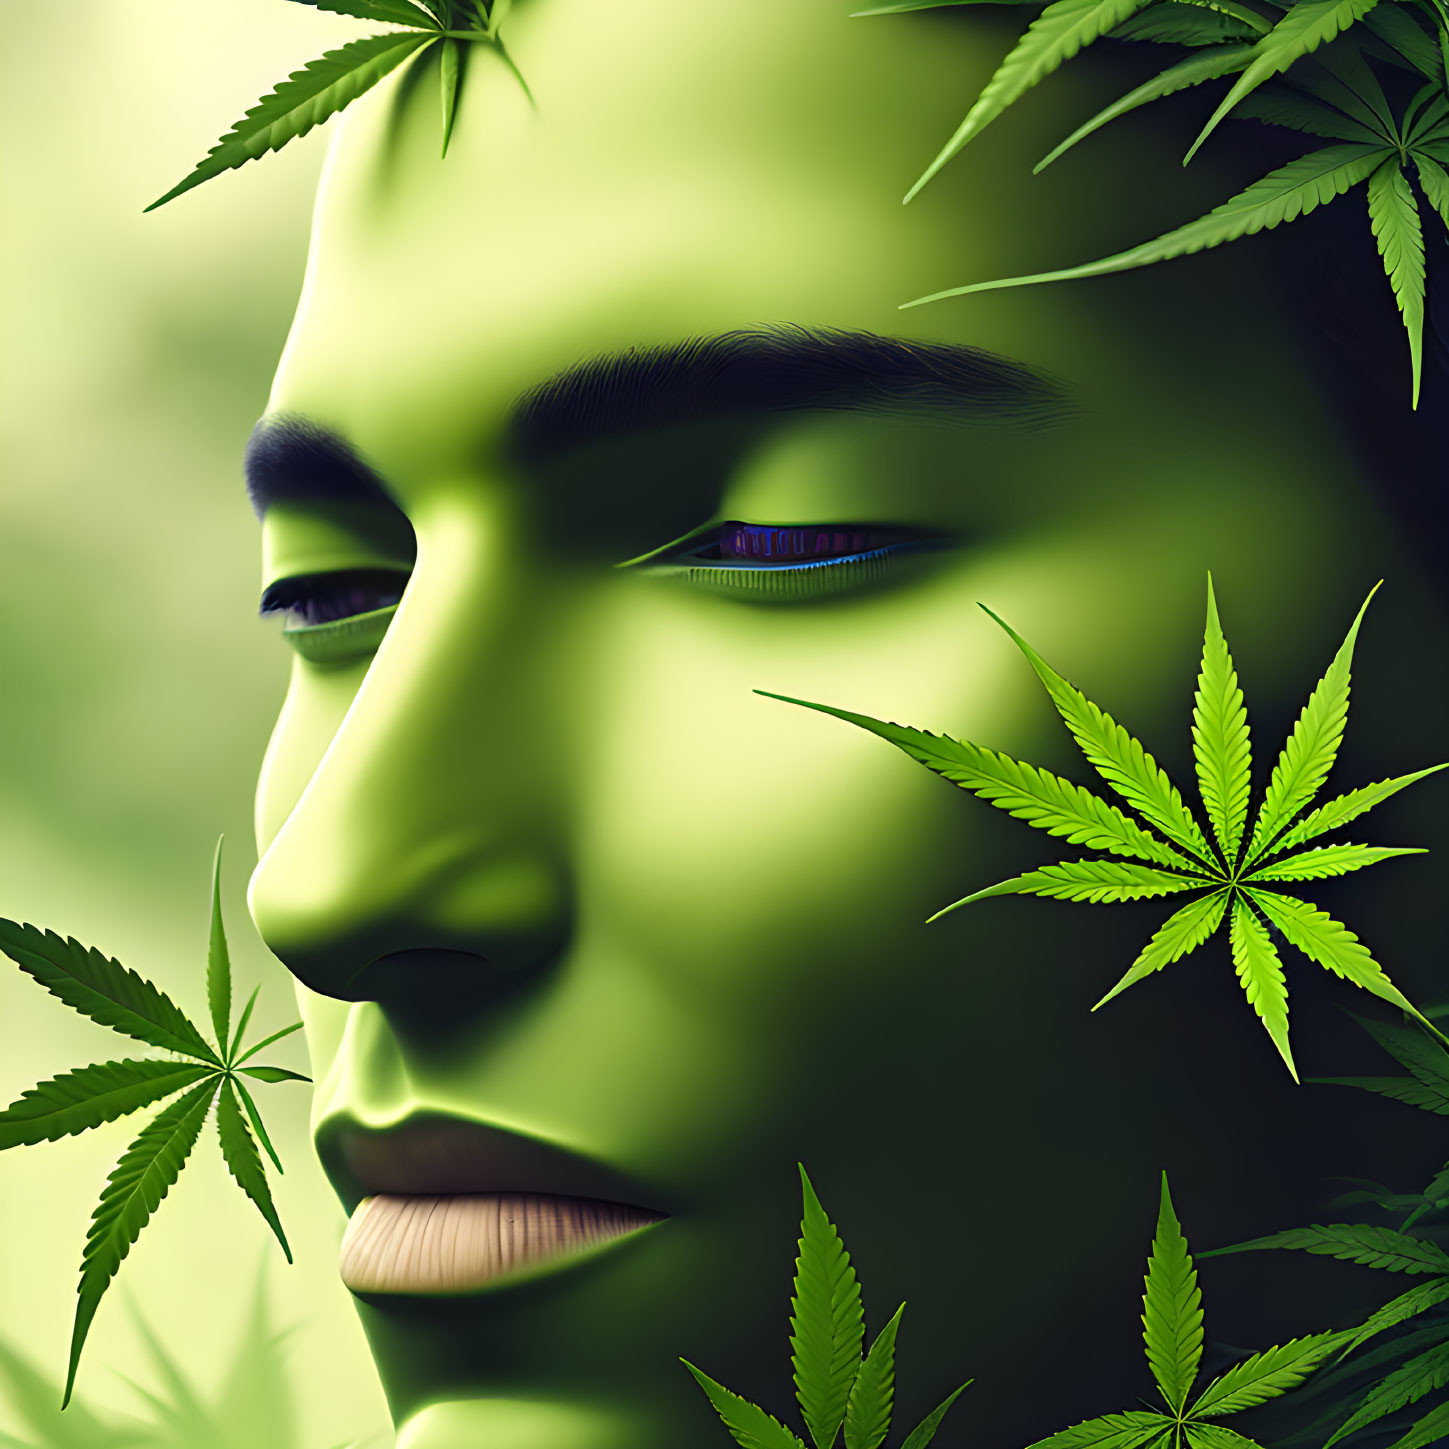 Surreal green-toned face blending with cannabis leaves, prominent eyes and lips